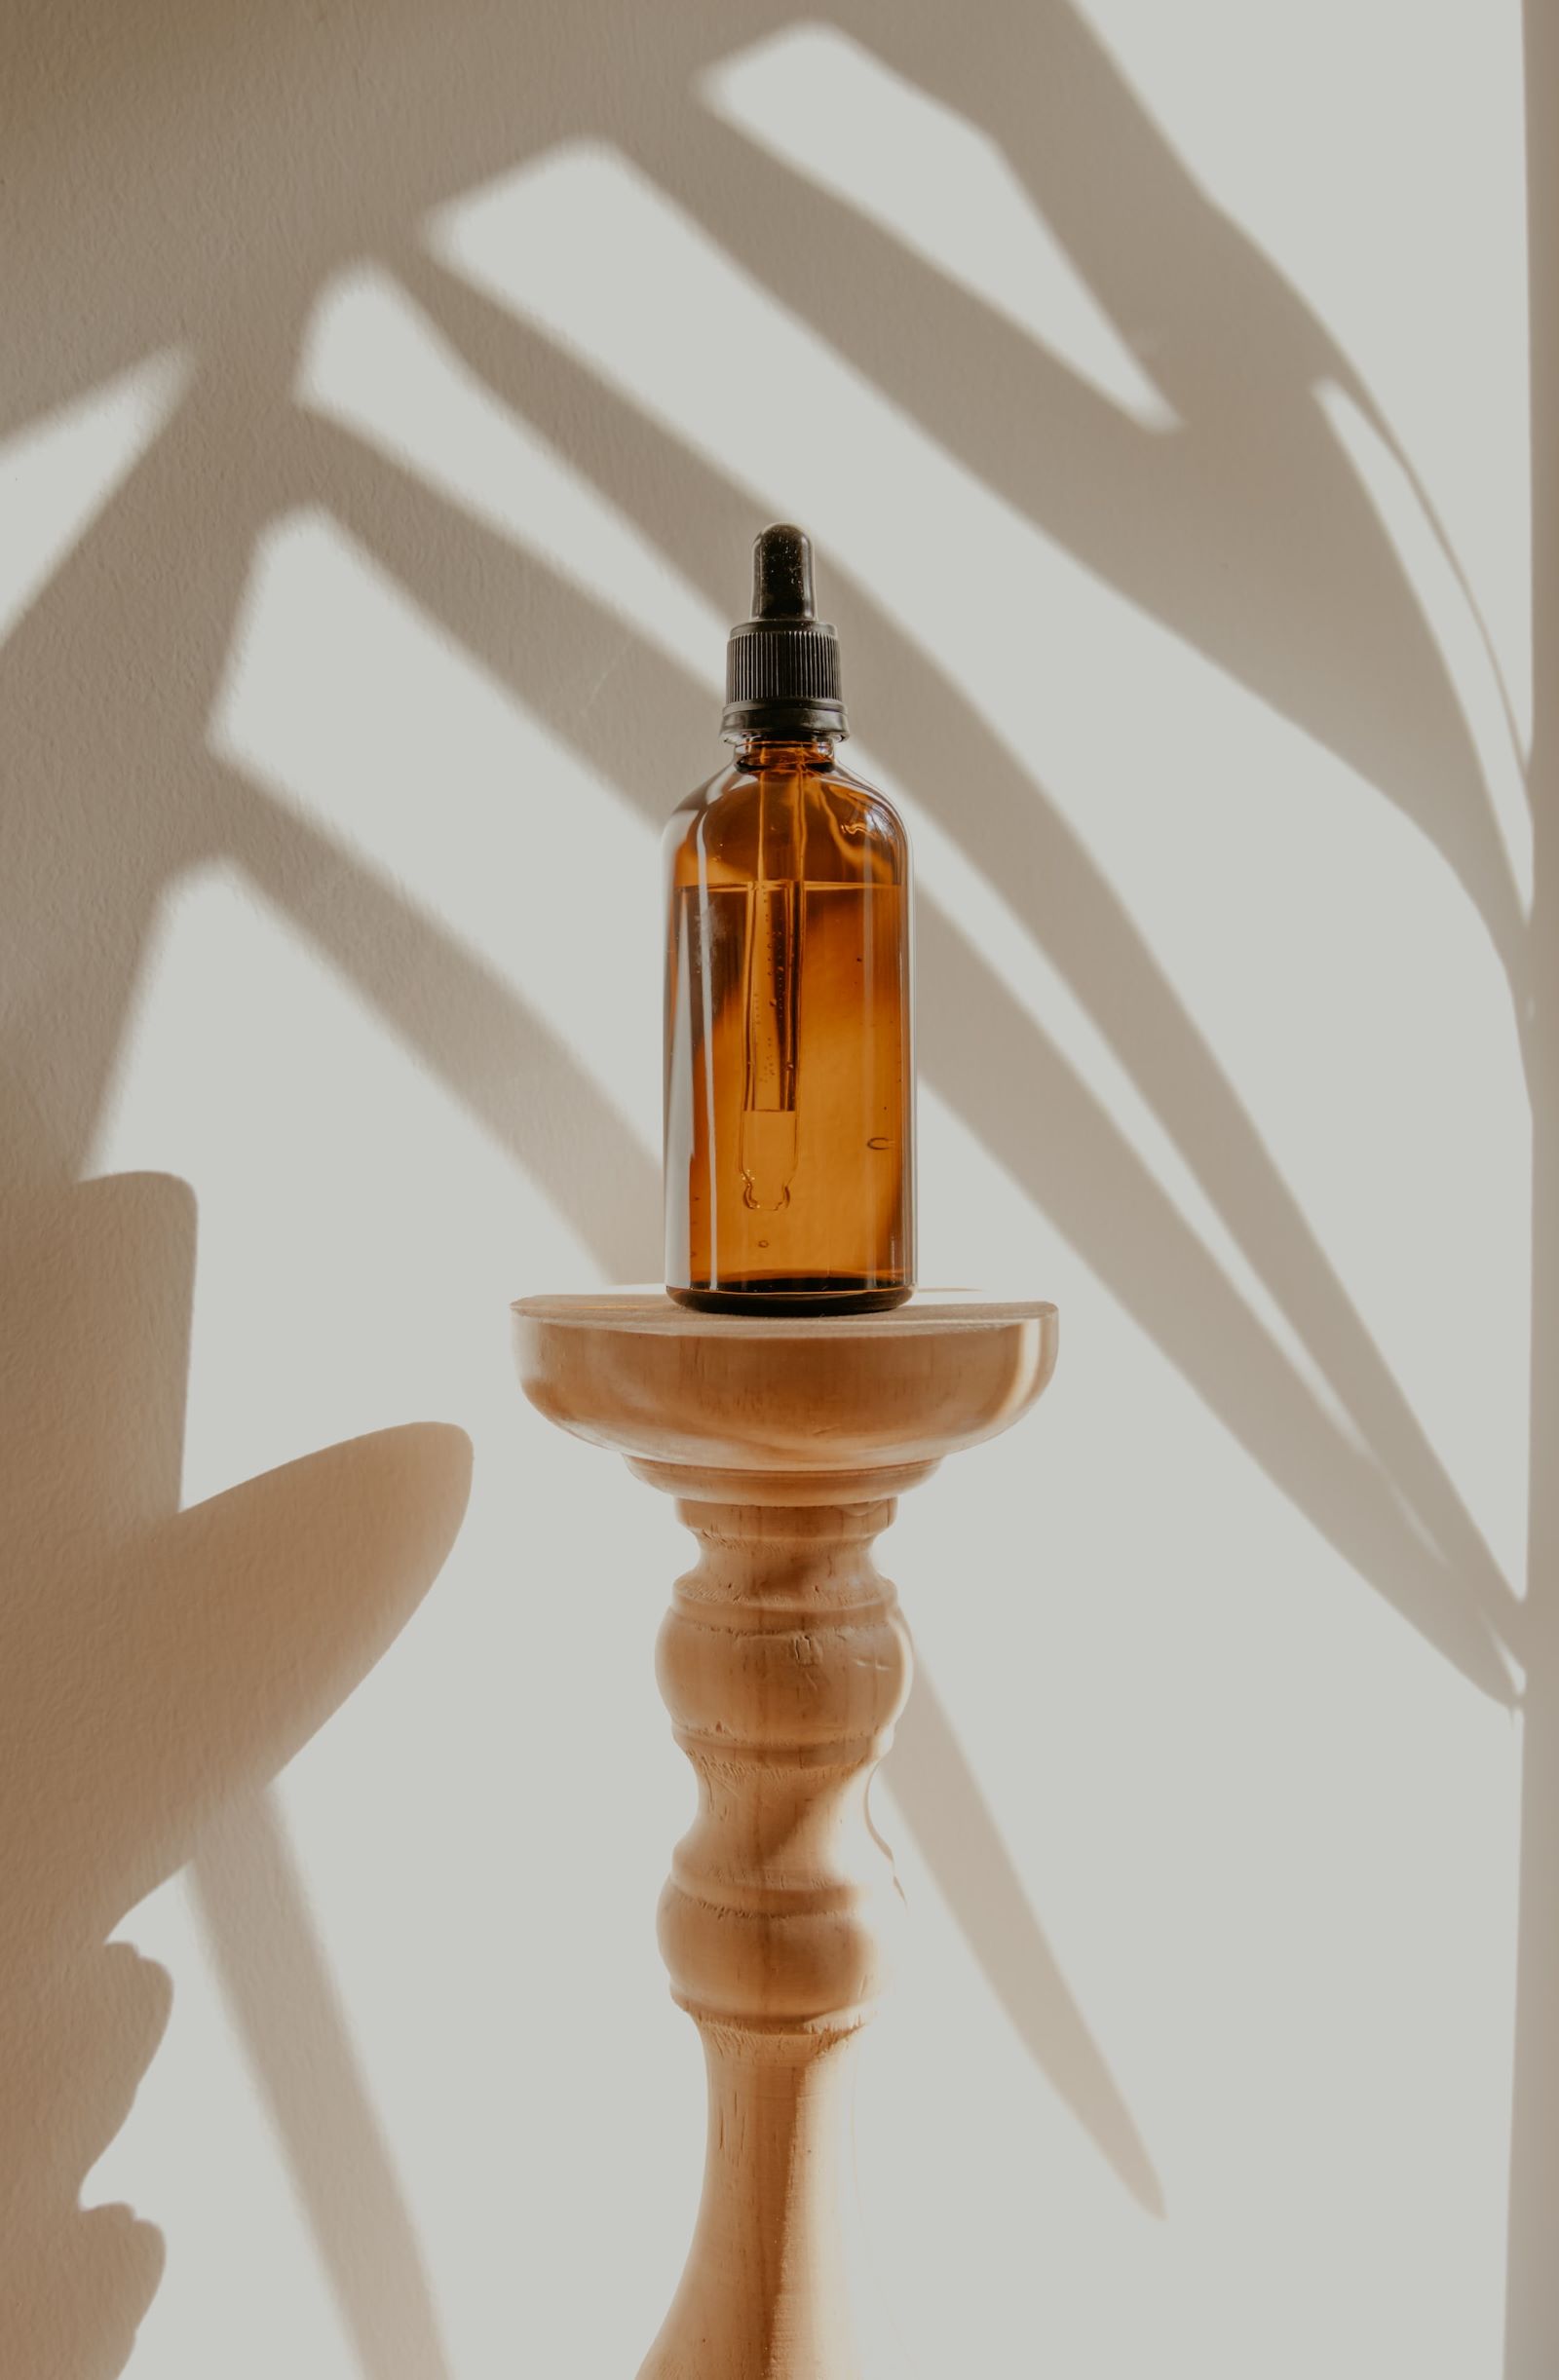 Brown glass bottle of essential oil on wooden stand and the shadow of a plant behind it